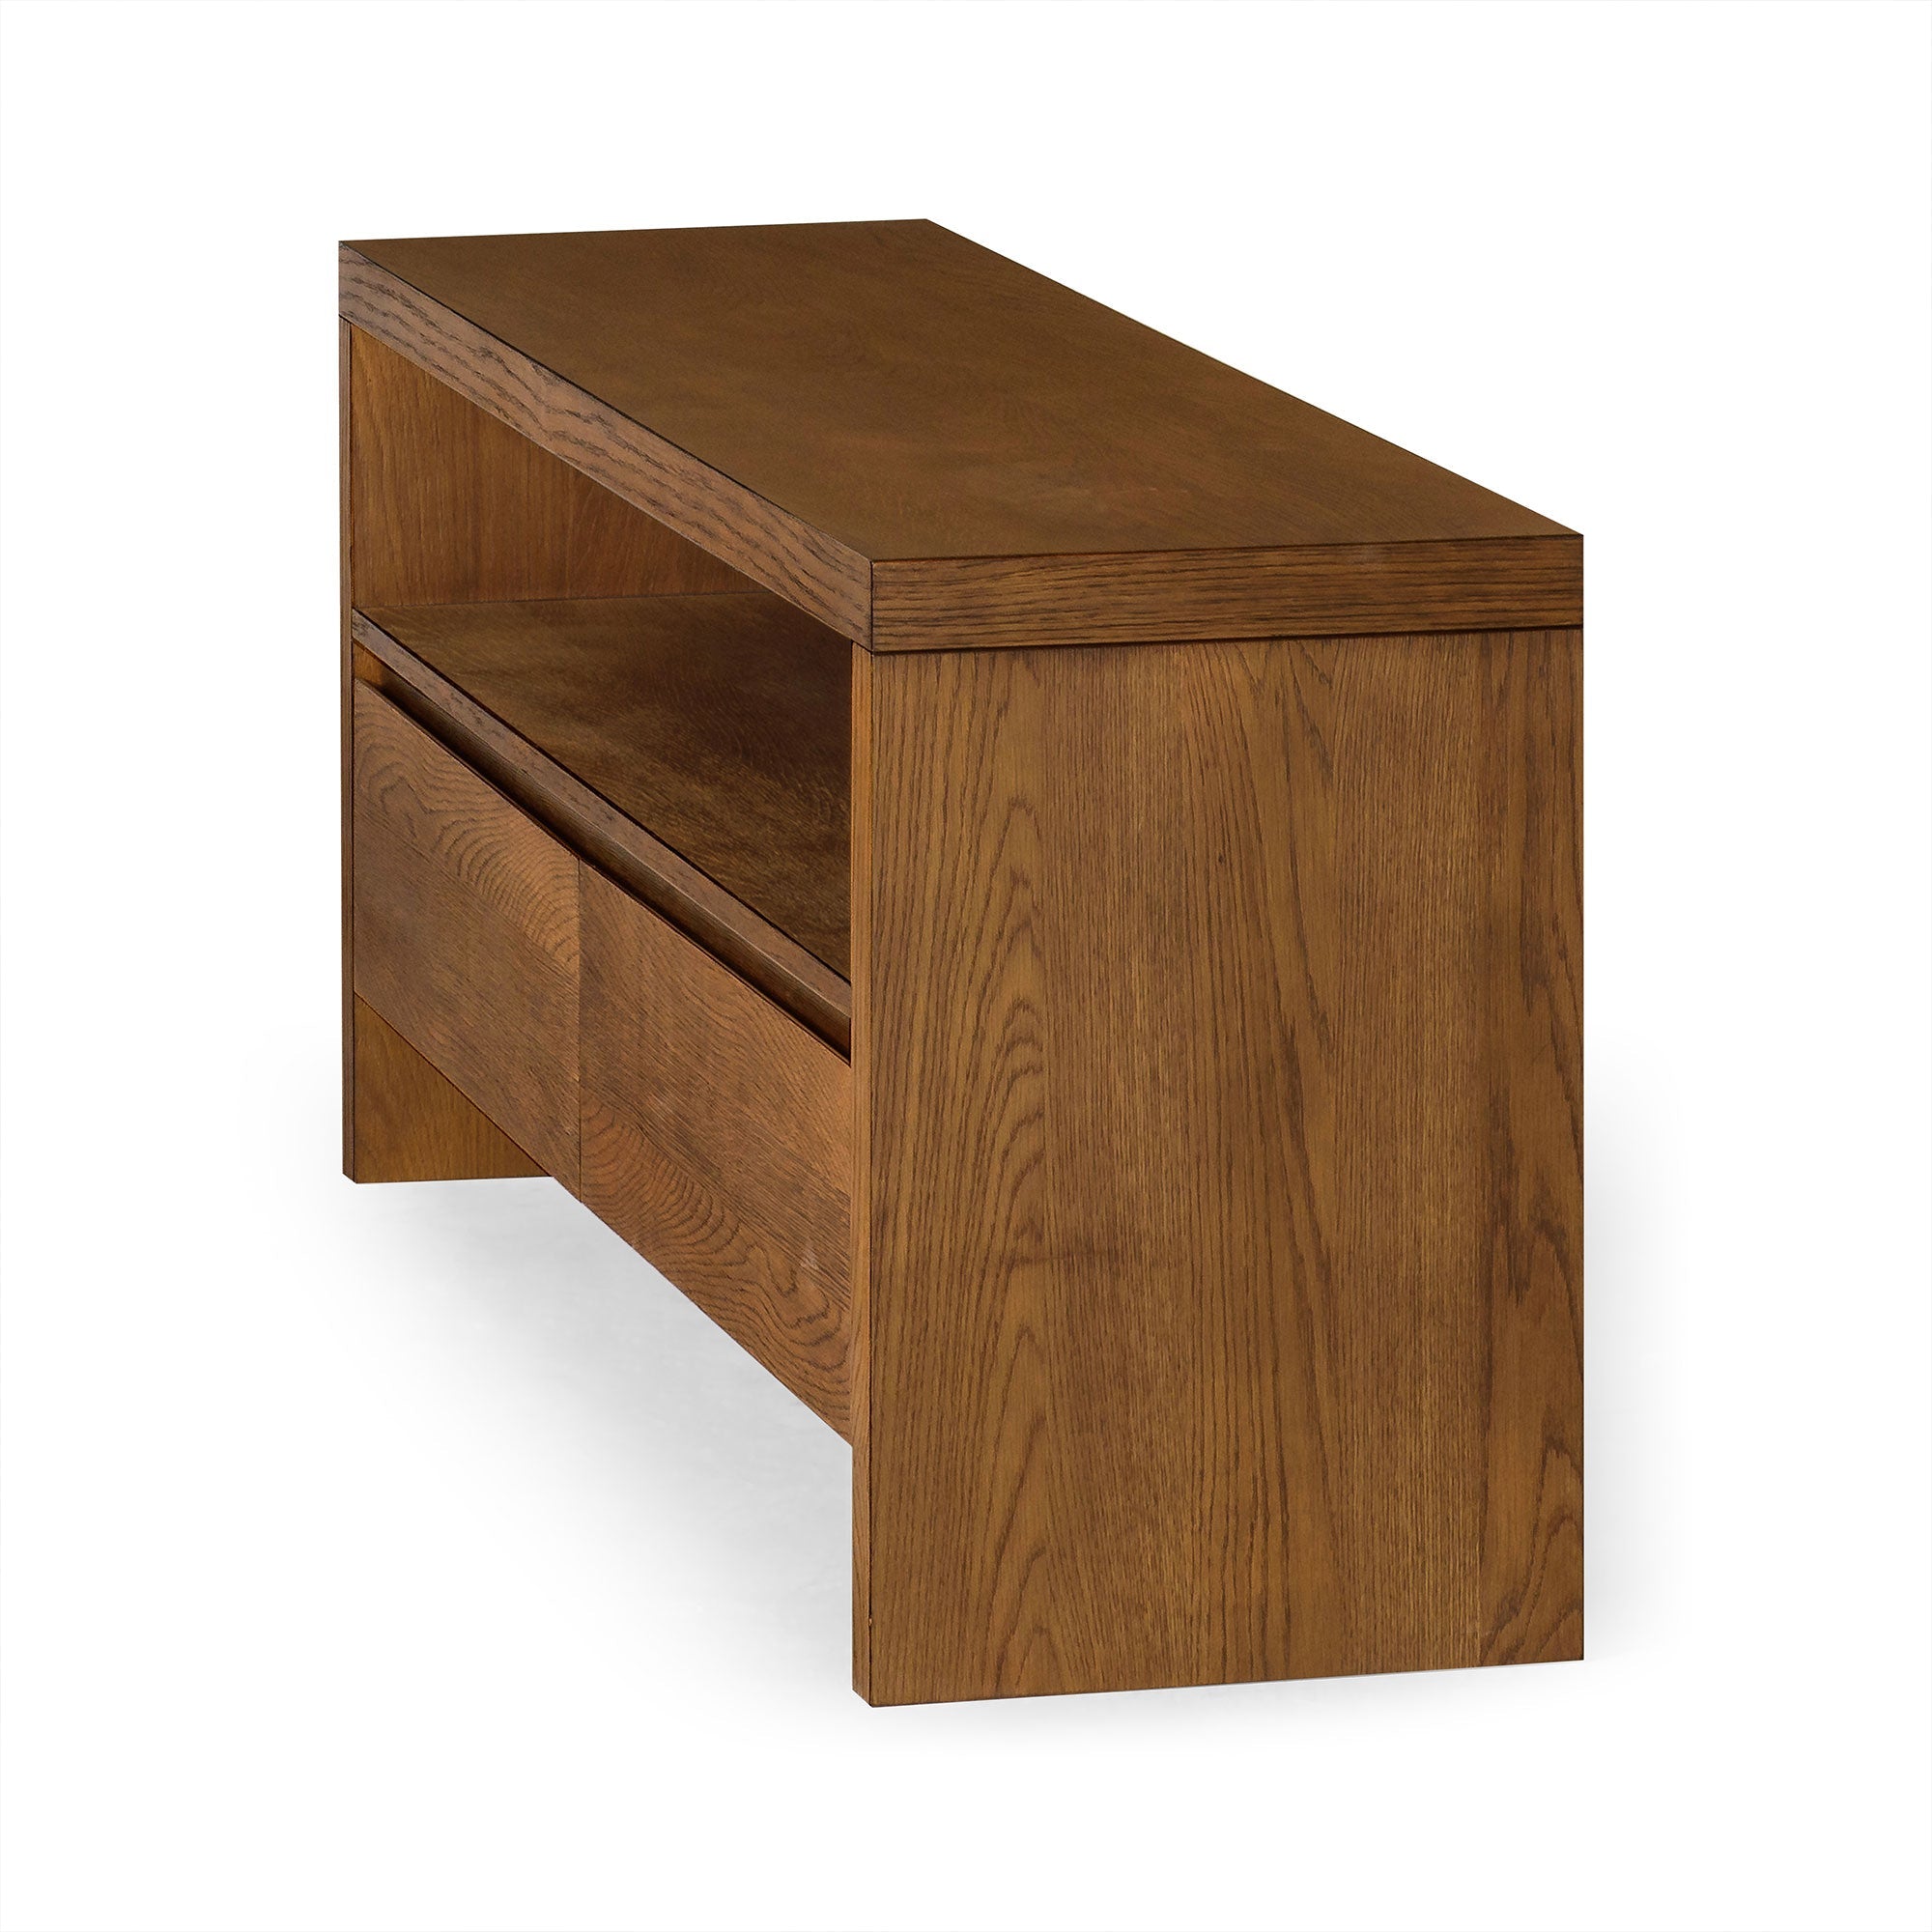 Ada Contemporary Wooden Media Unit in Refined Brown Finish in Media Units by Maven Lane